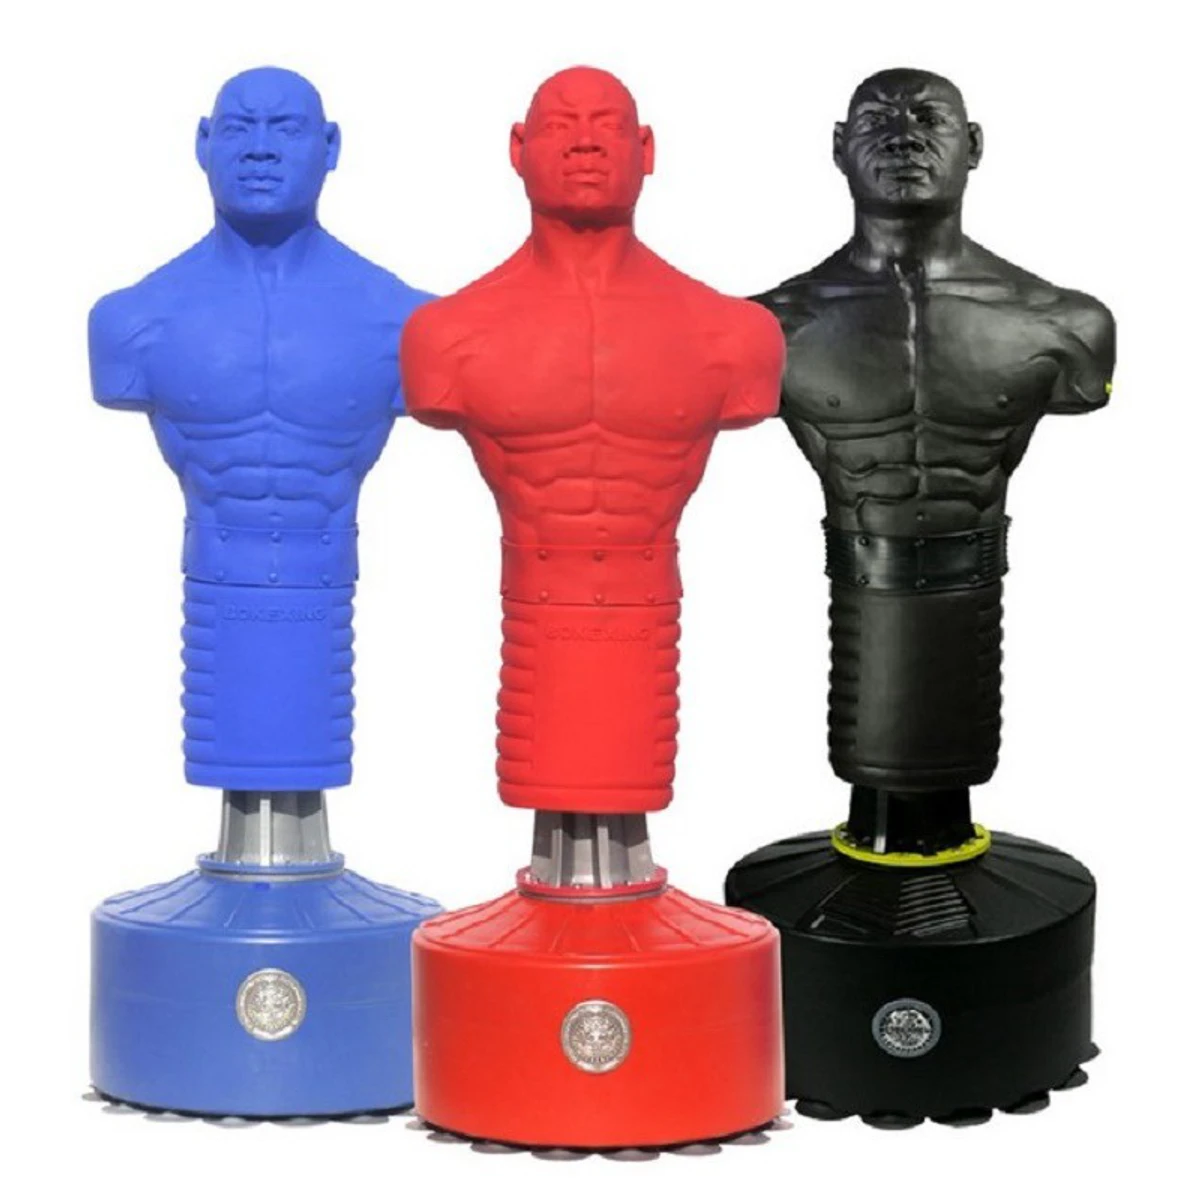 Adjustable Silicone Punching Bag Boxing Dummy Free Standing Boxing Bag